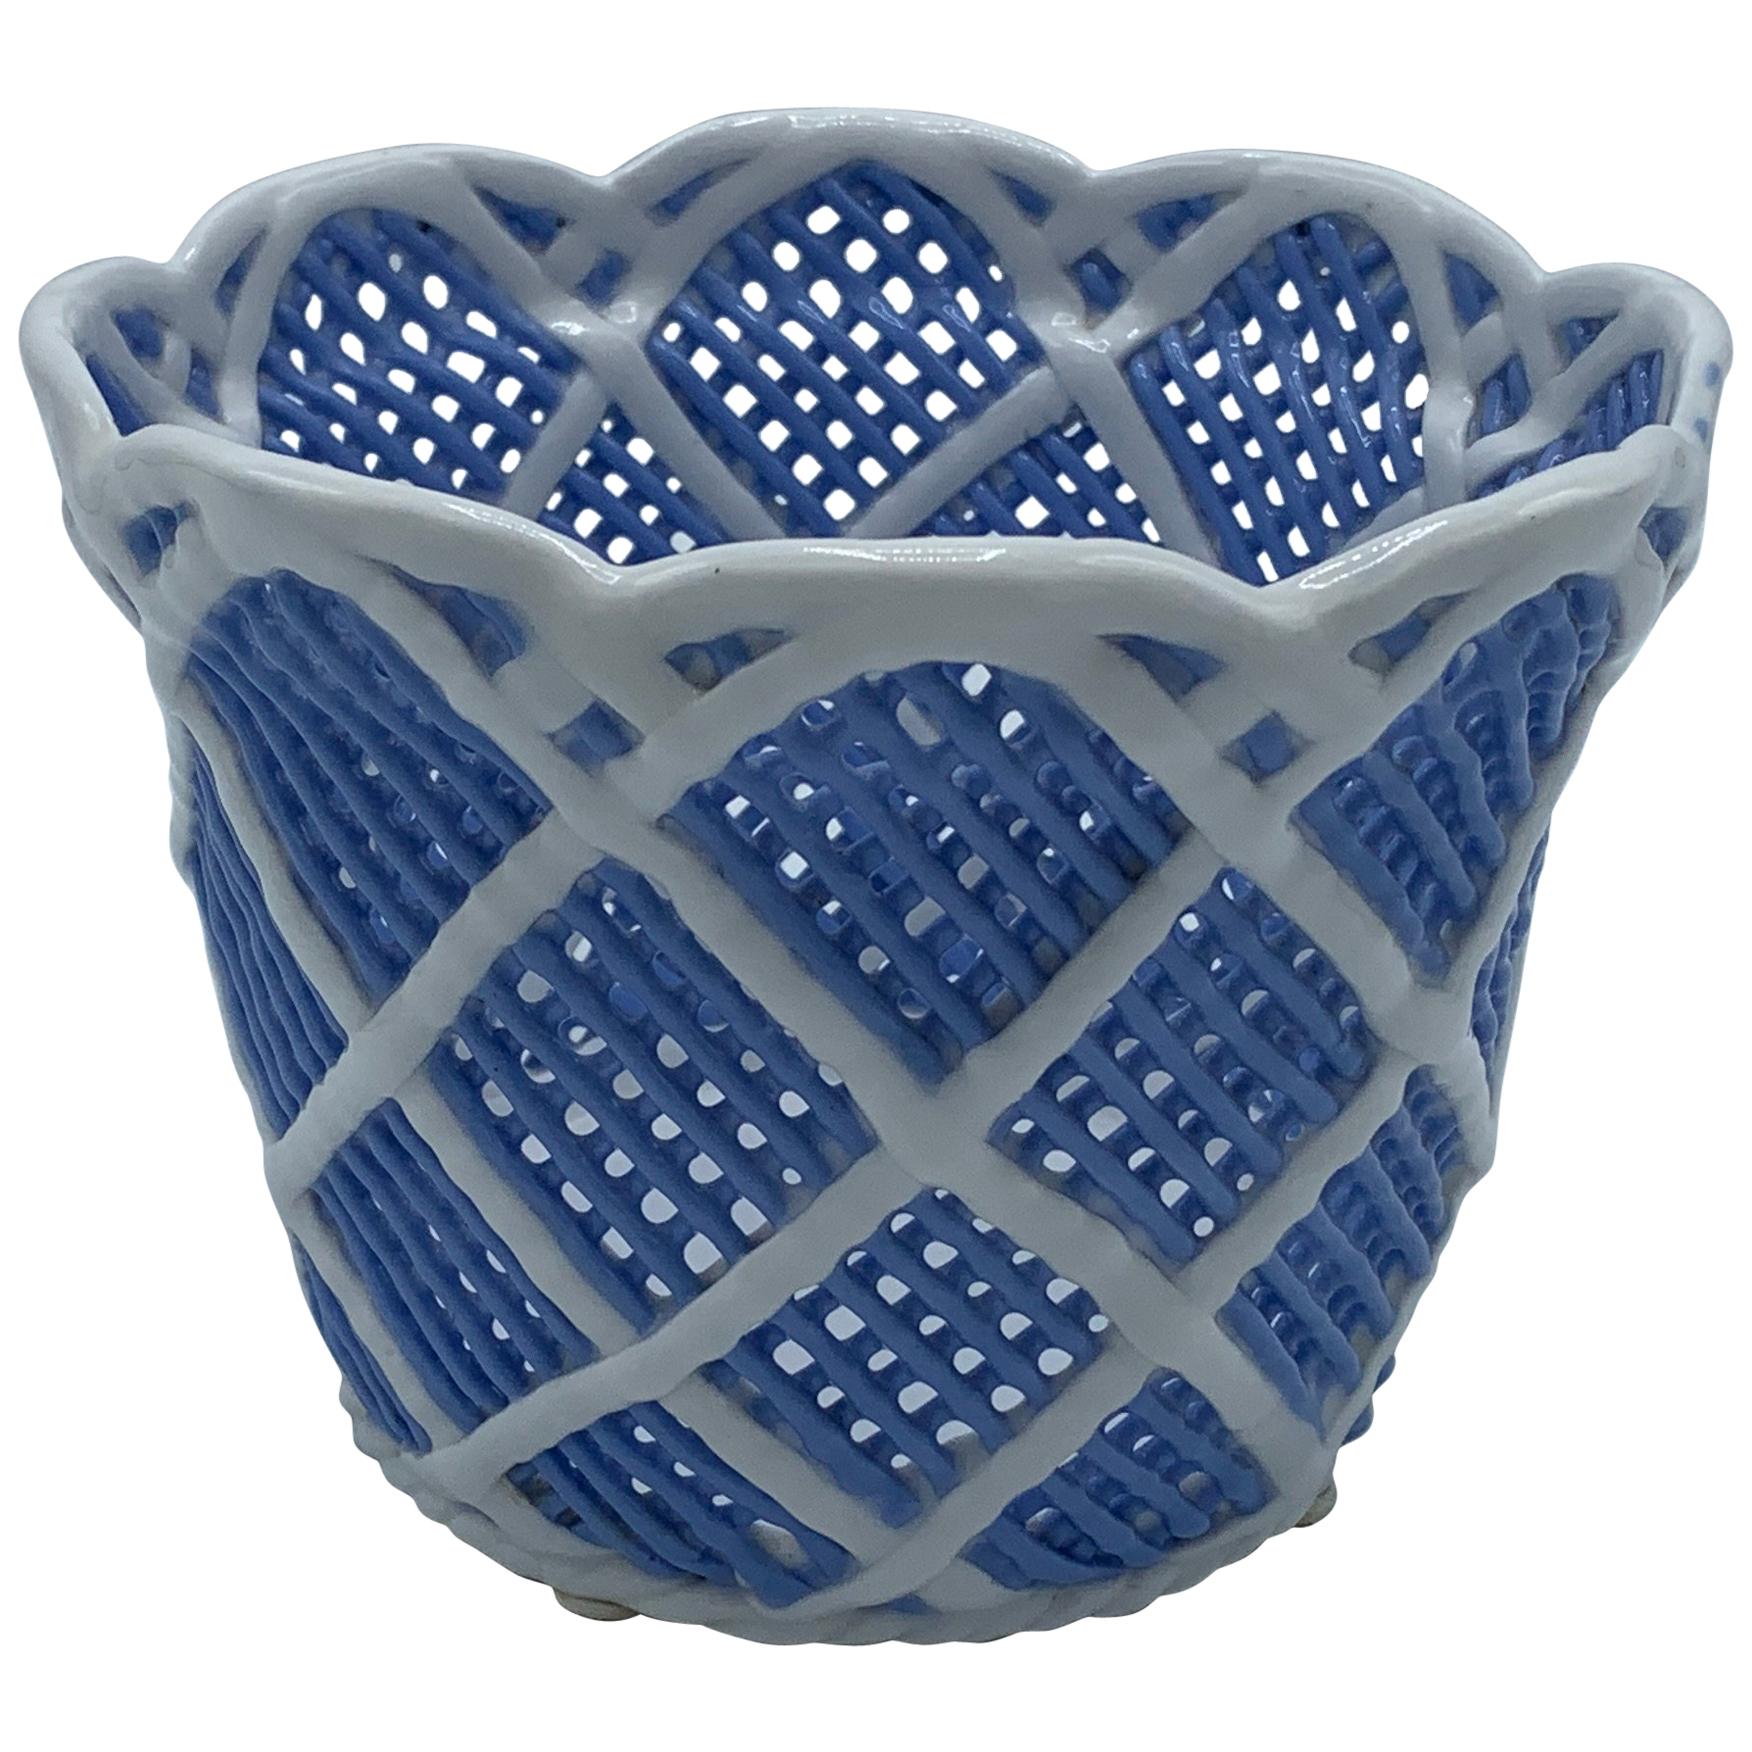 1960s Italian Blue and White Porcelain Basketweave Cachepot